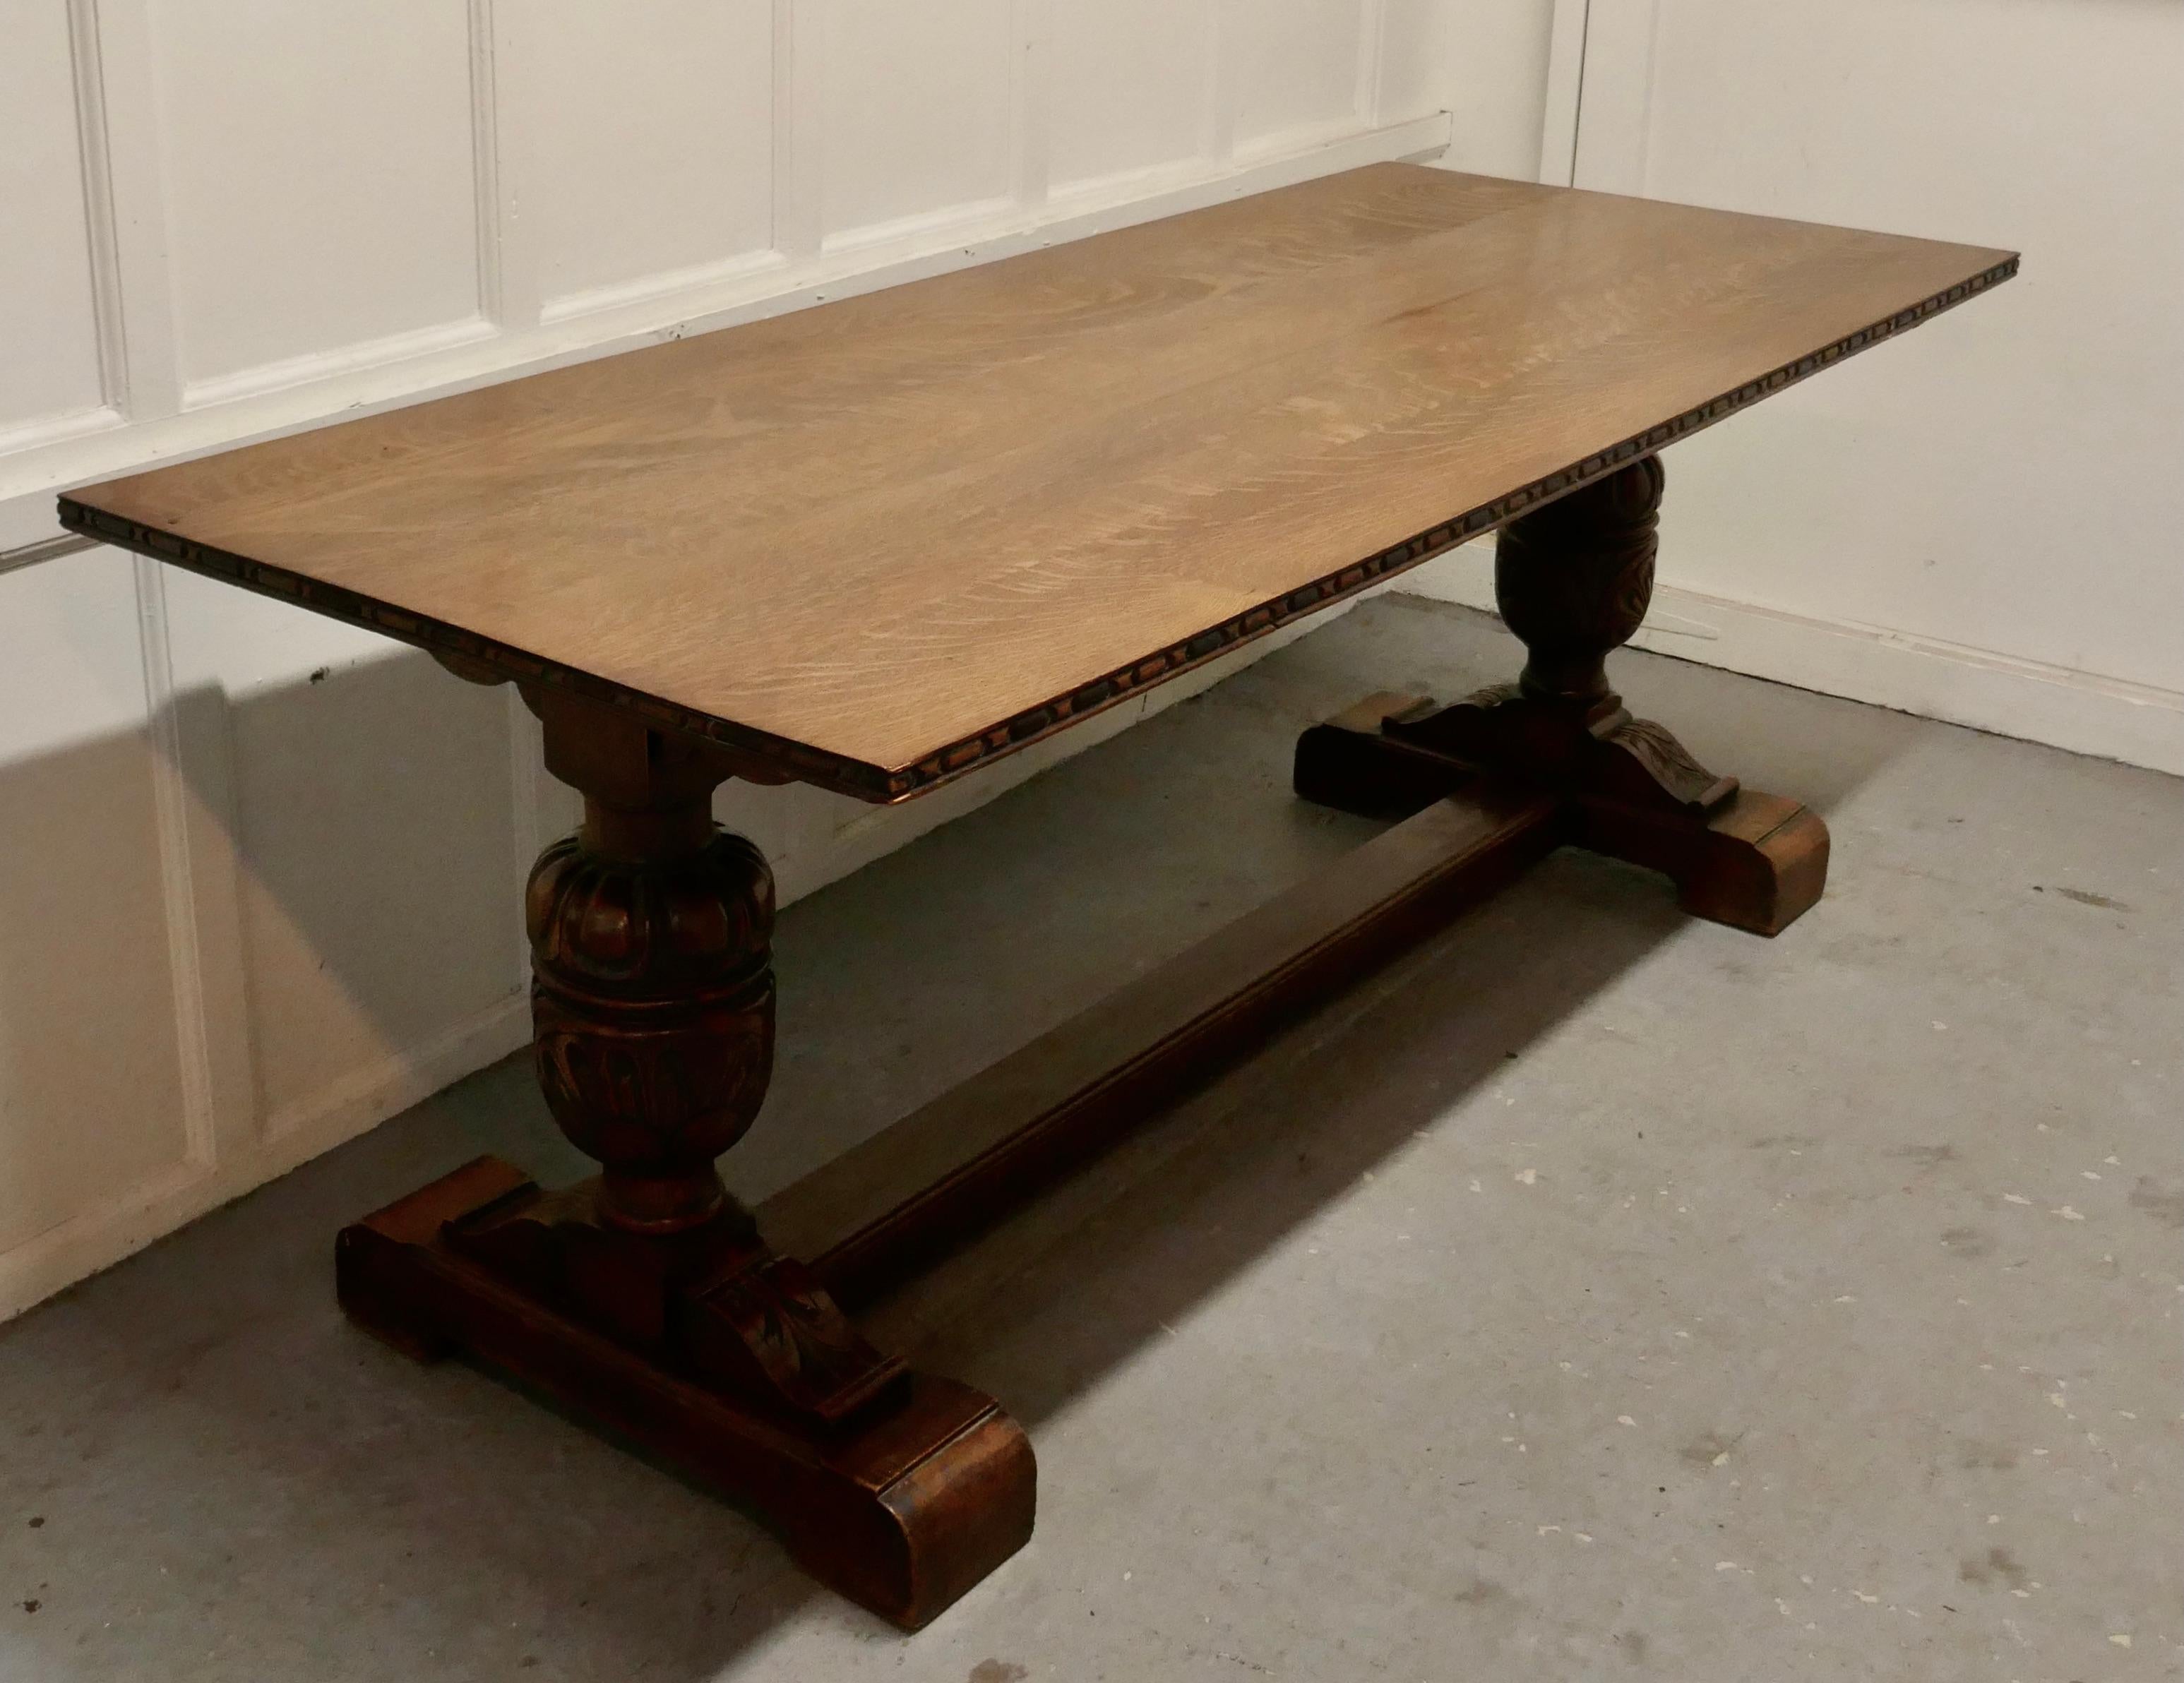 Victorian oak refectory table.

This is a good sturdy table, it has a solid oak planked top with a moulded edge, it has a good natural patina, the legs are in the refectory style with a floor Stretcher and bulbous pineapple carved legs these are